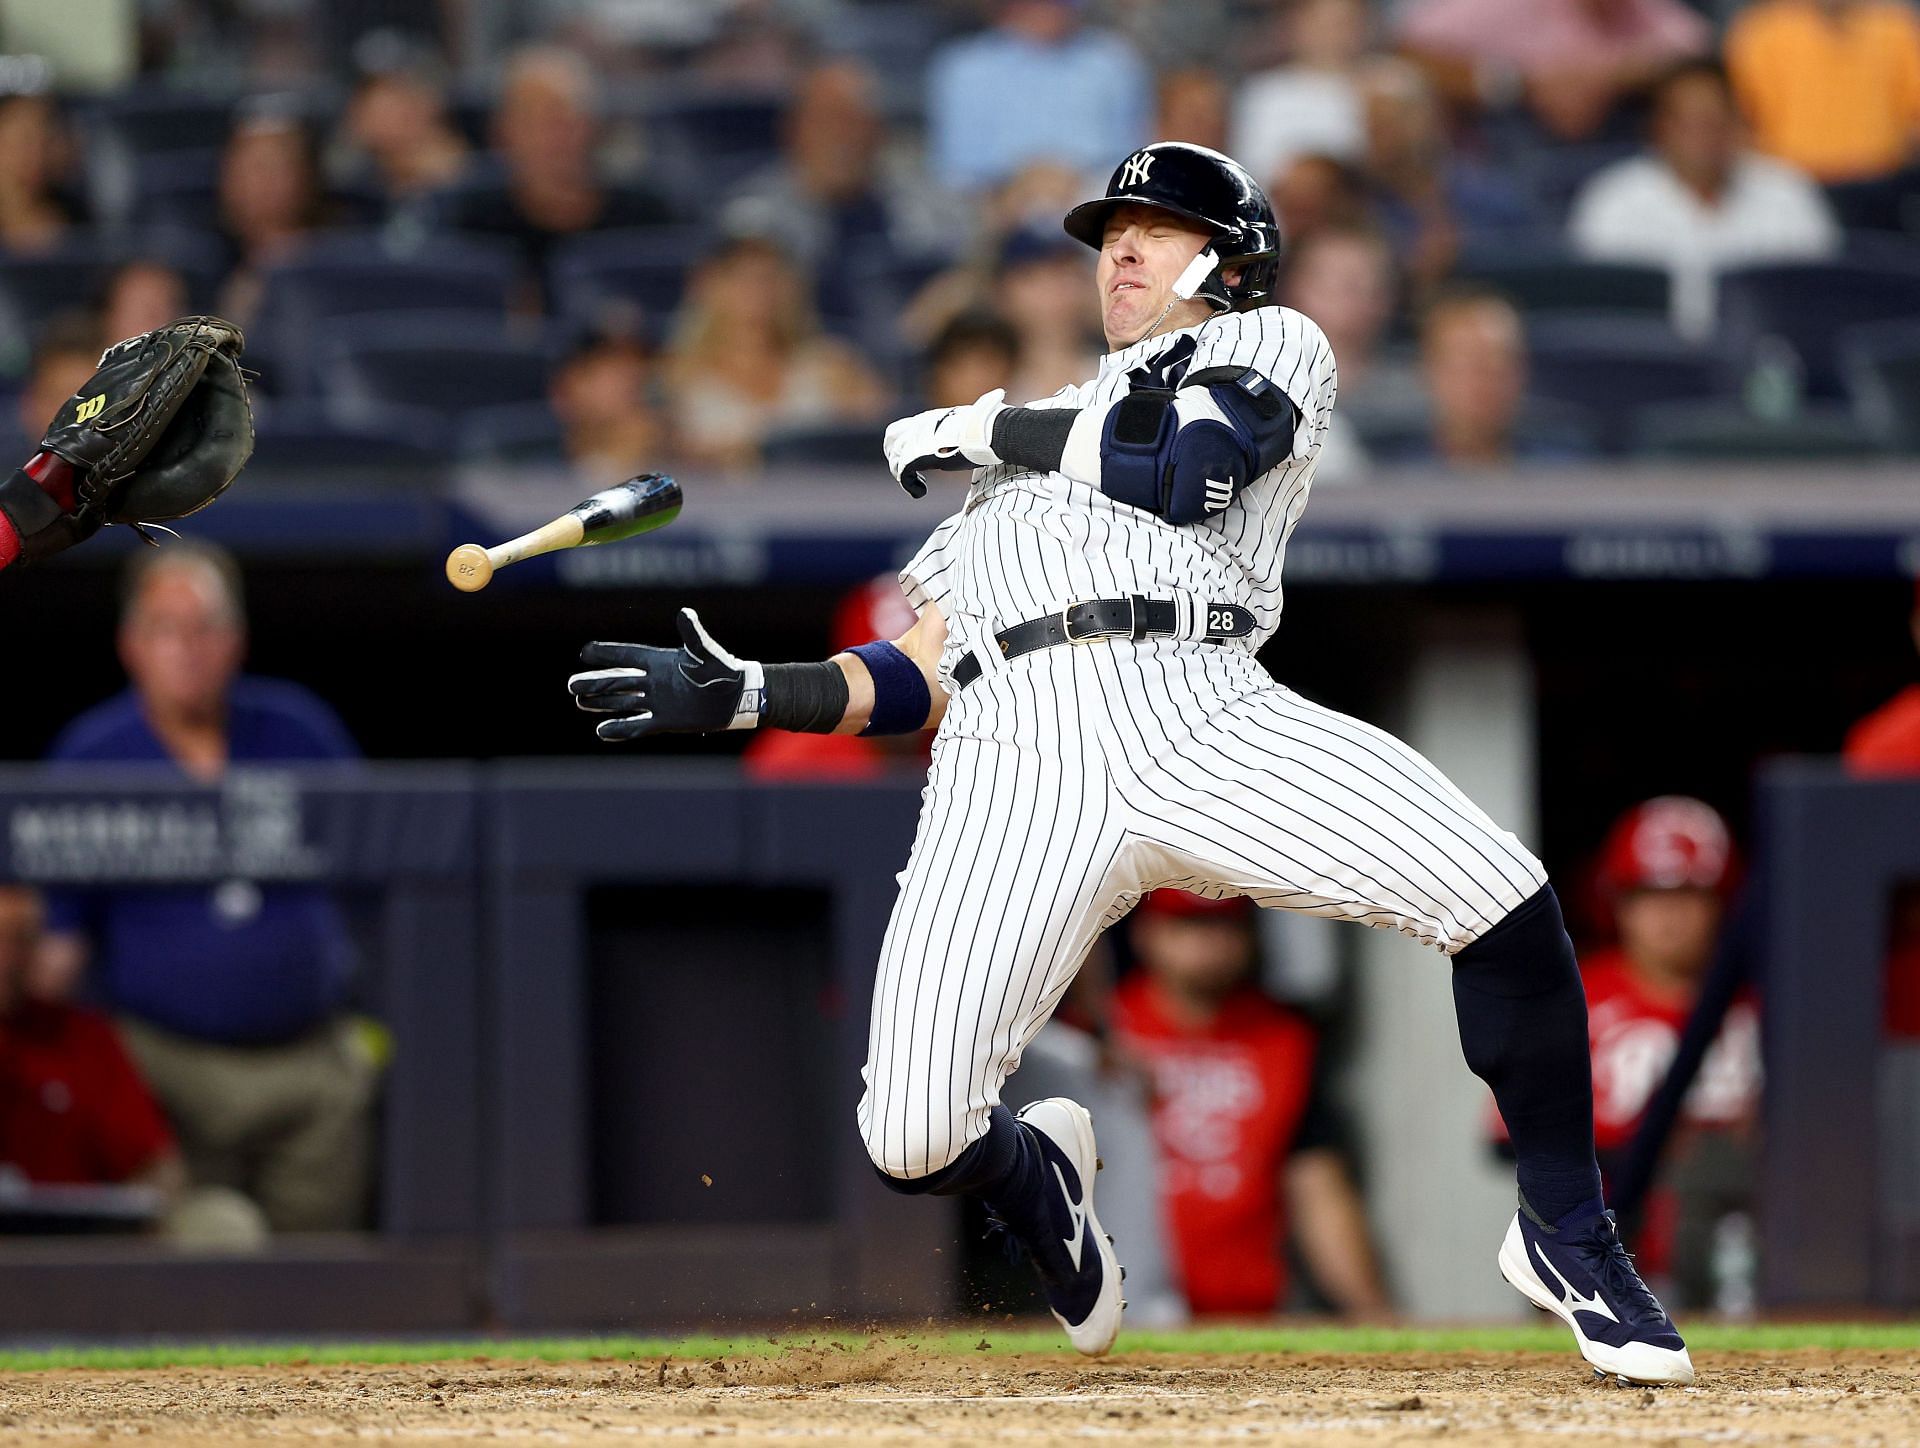 Even Cleanshaven Faces Cannot Help Yankees Stop Their Slide - The